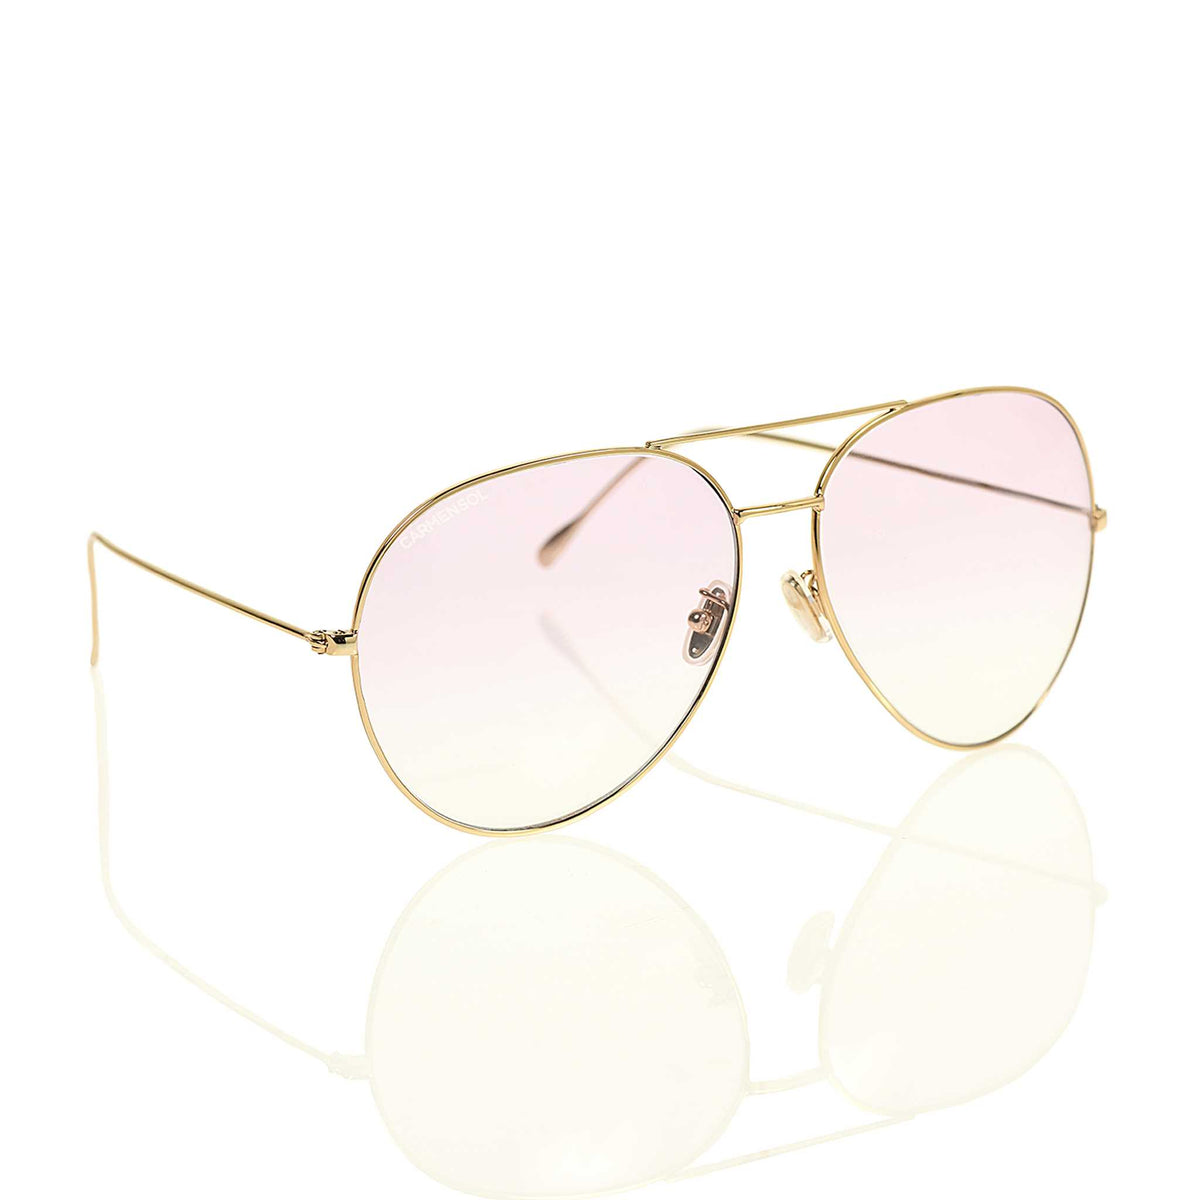 Stylish Made in Italy sunglasses for women 